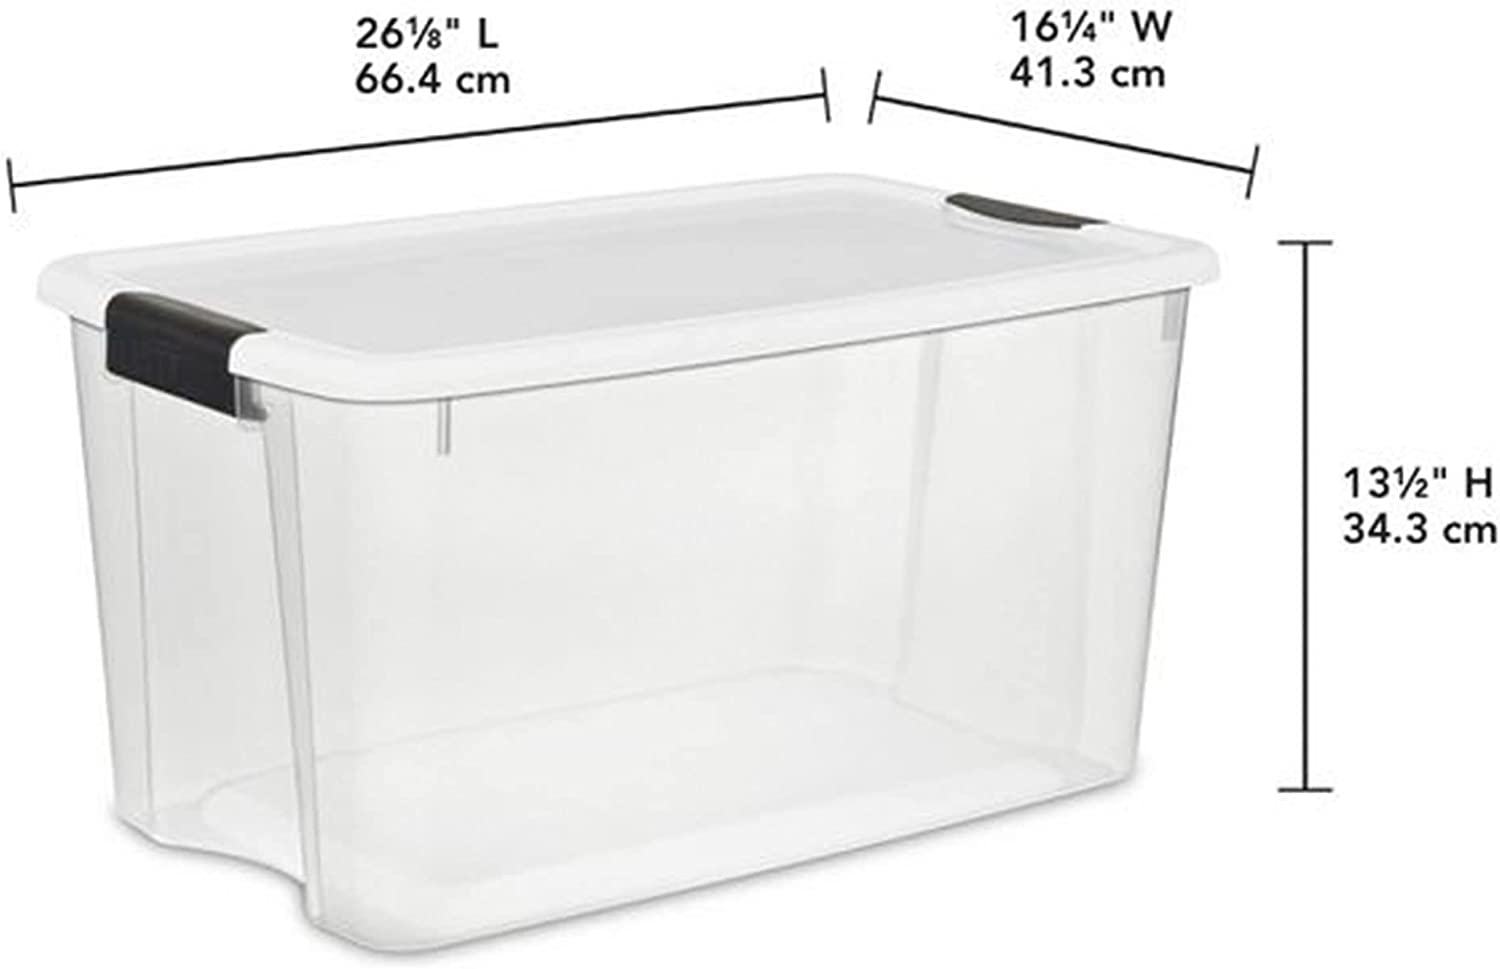 https://bigbigmart.com/wp-content/uploads/2023/06/Sterilite-70-Quart-Clear-Plastic-Stackable-Storage-Container-Bin-Box-Tote-with-White-Latching-Lid-Organizing-Solution-for-Home-Classroom-8-Pack1.jpg